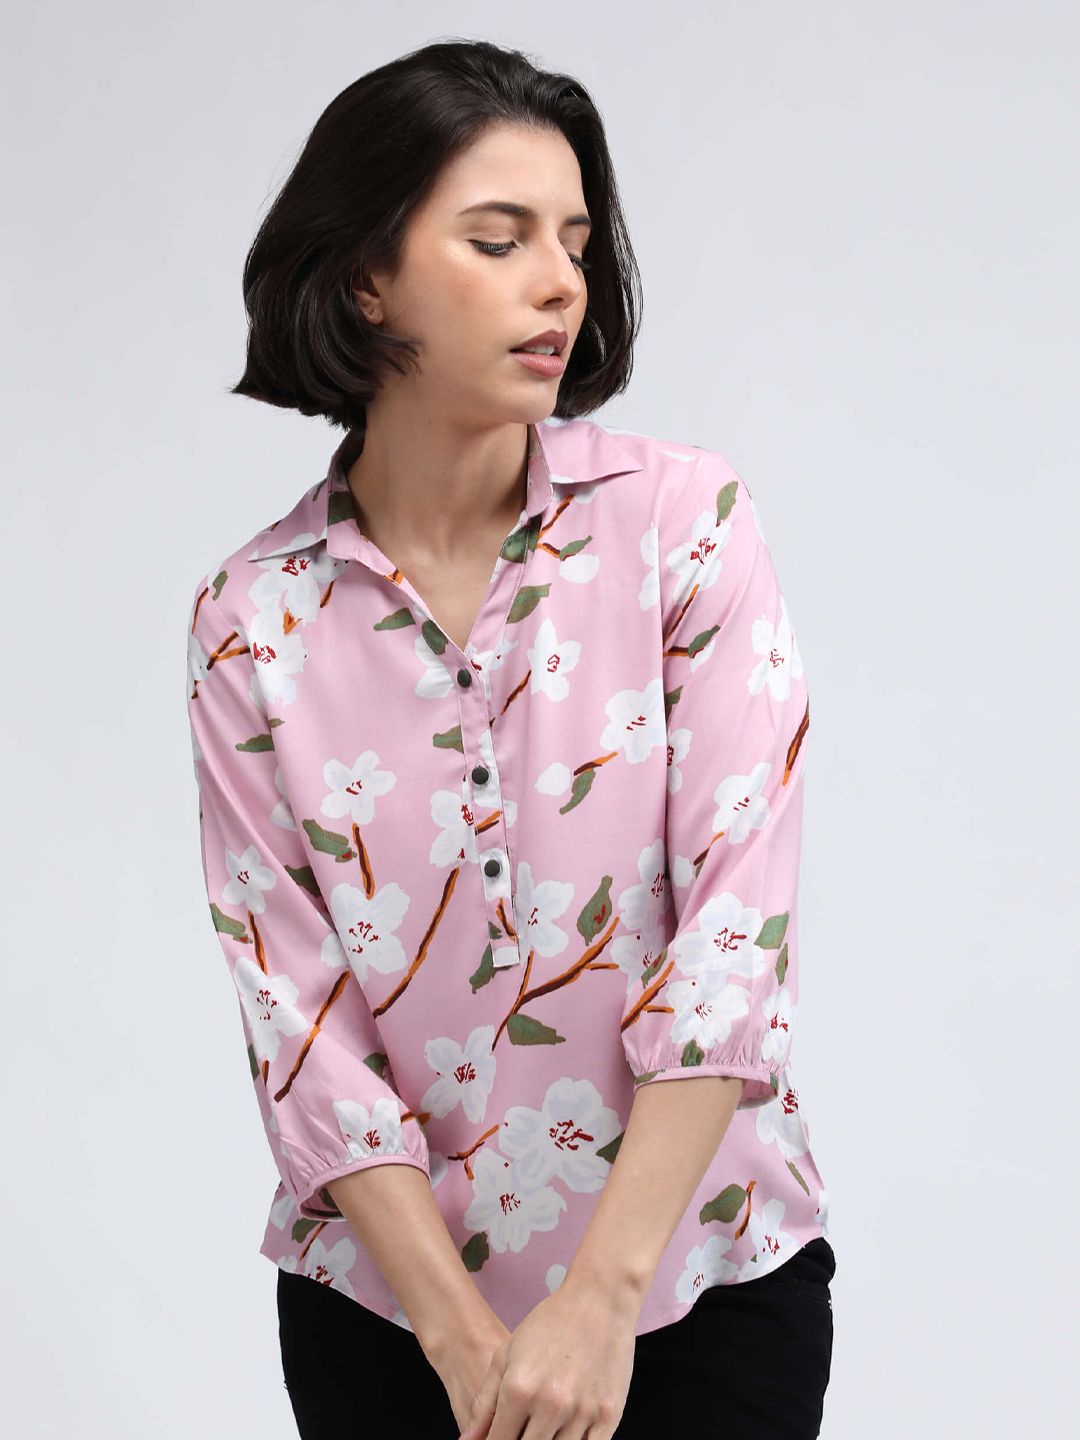 IDK Pink Floral Print Shirt Style Top Price in India